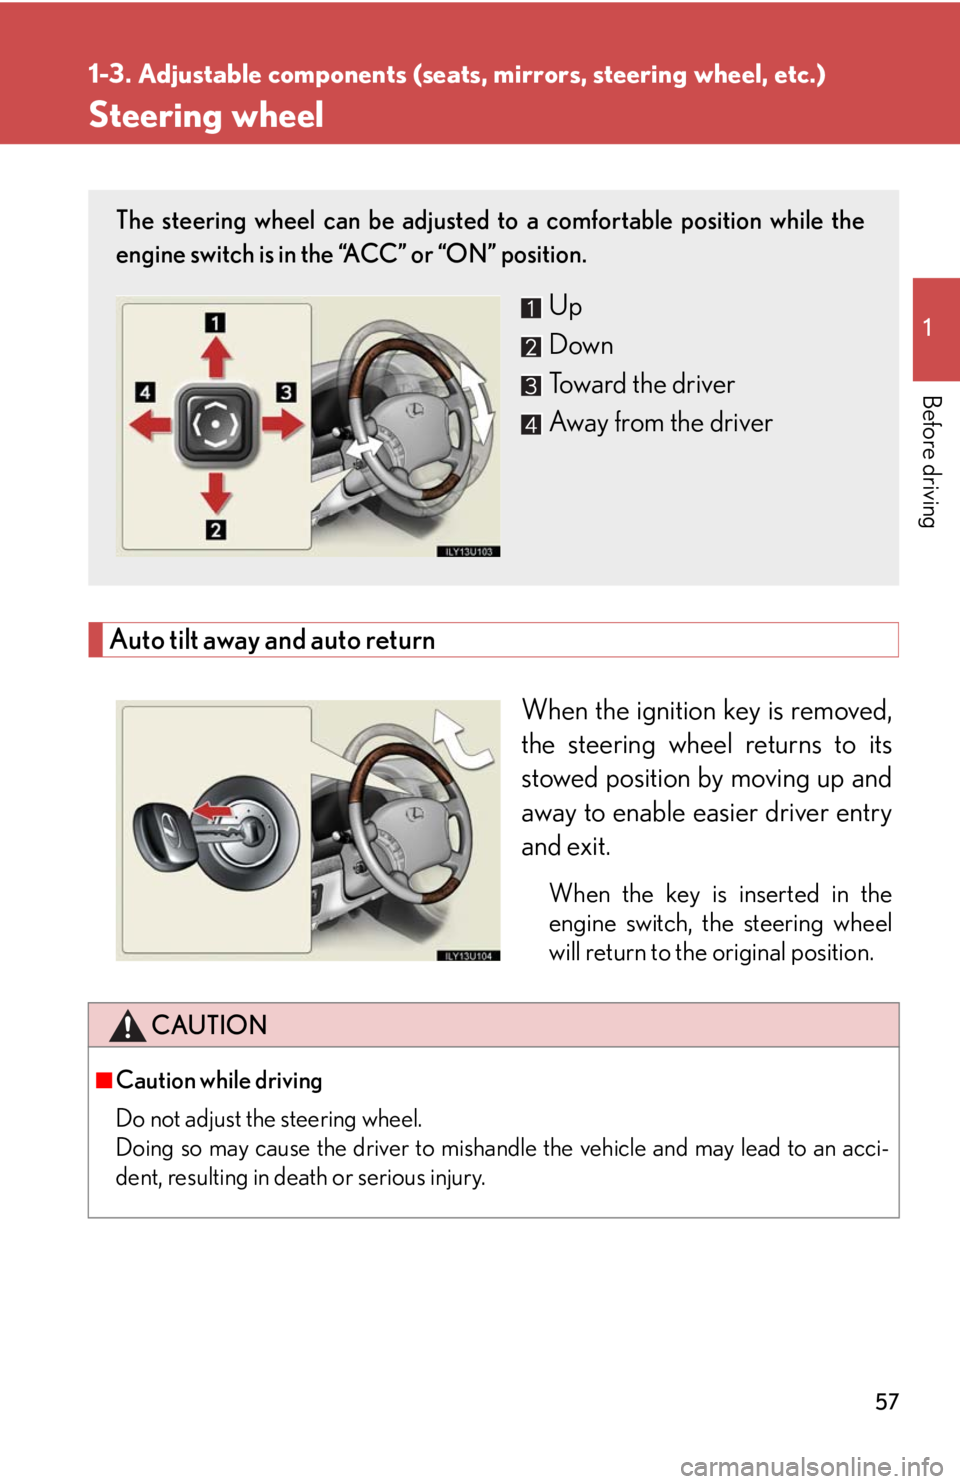 Lexus GX470 2008  Using other driving systems / LEXUS 2008 GX470 OWNERS MANUAL (OM60D82U) 57
1
1-3. Adjustable components (seats, mirrors, steering wheel, etc.)
Before driving
Steering wheel
Auto tilt away and auto return
When the ignition key is removed,
the steering wheel returns to its
